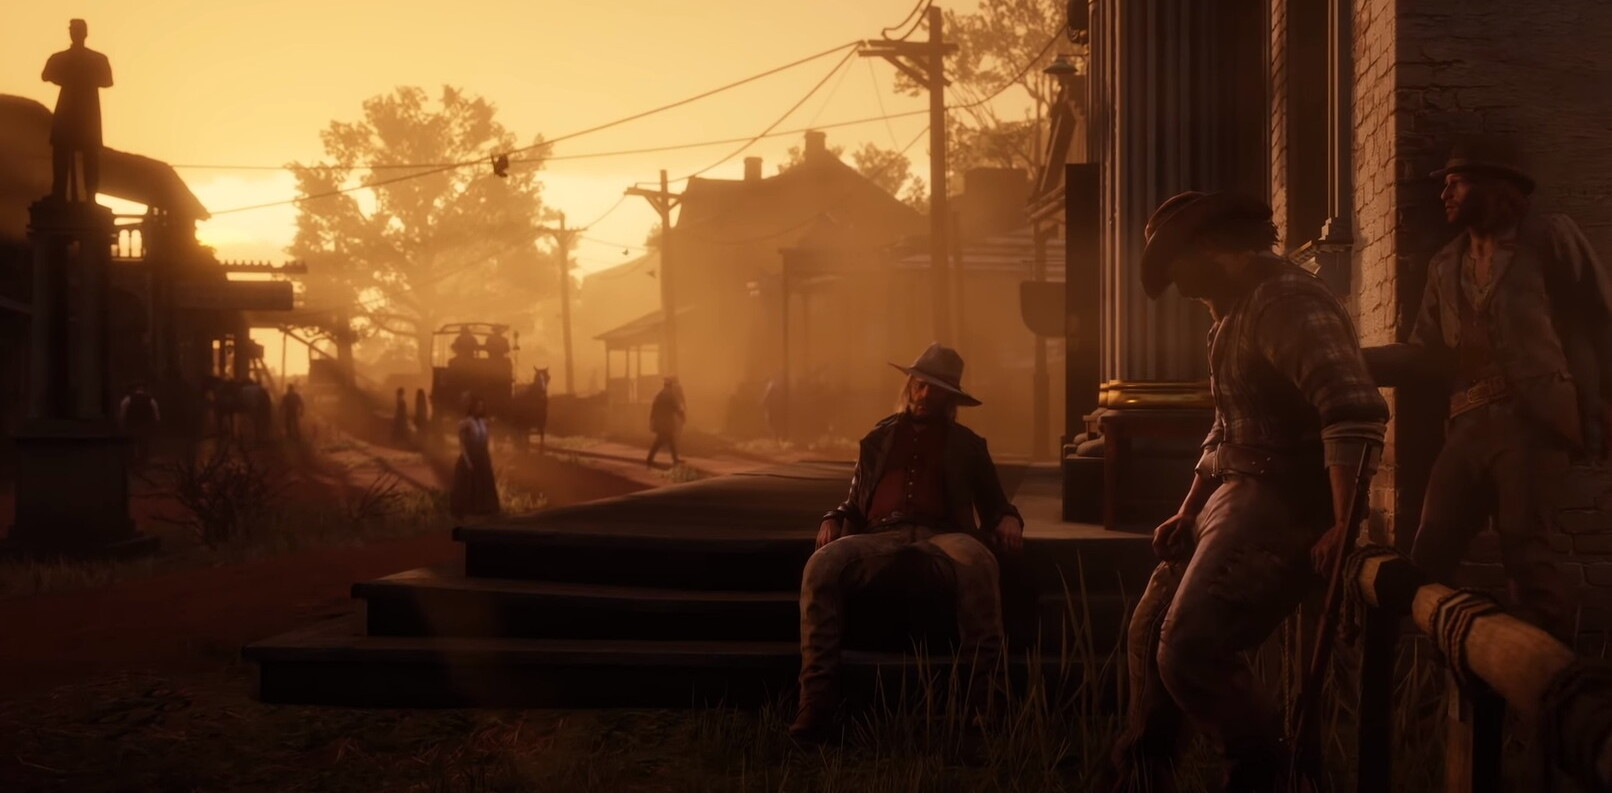 Red Dead Redemption 2 gets a glorious 4K trailer ahead of its PC release